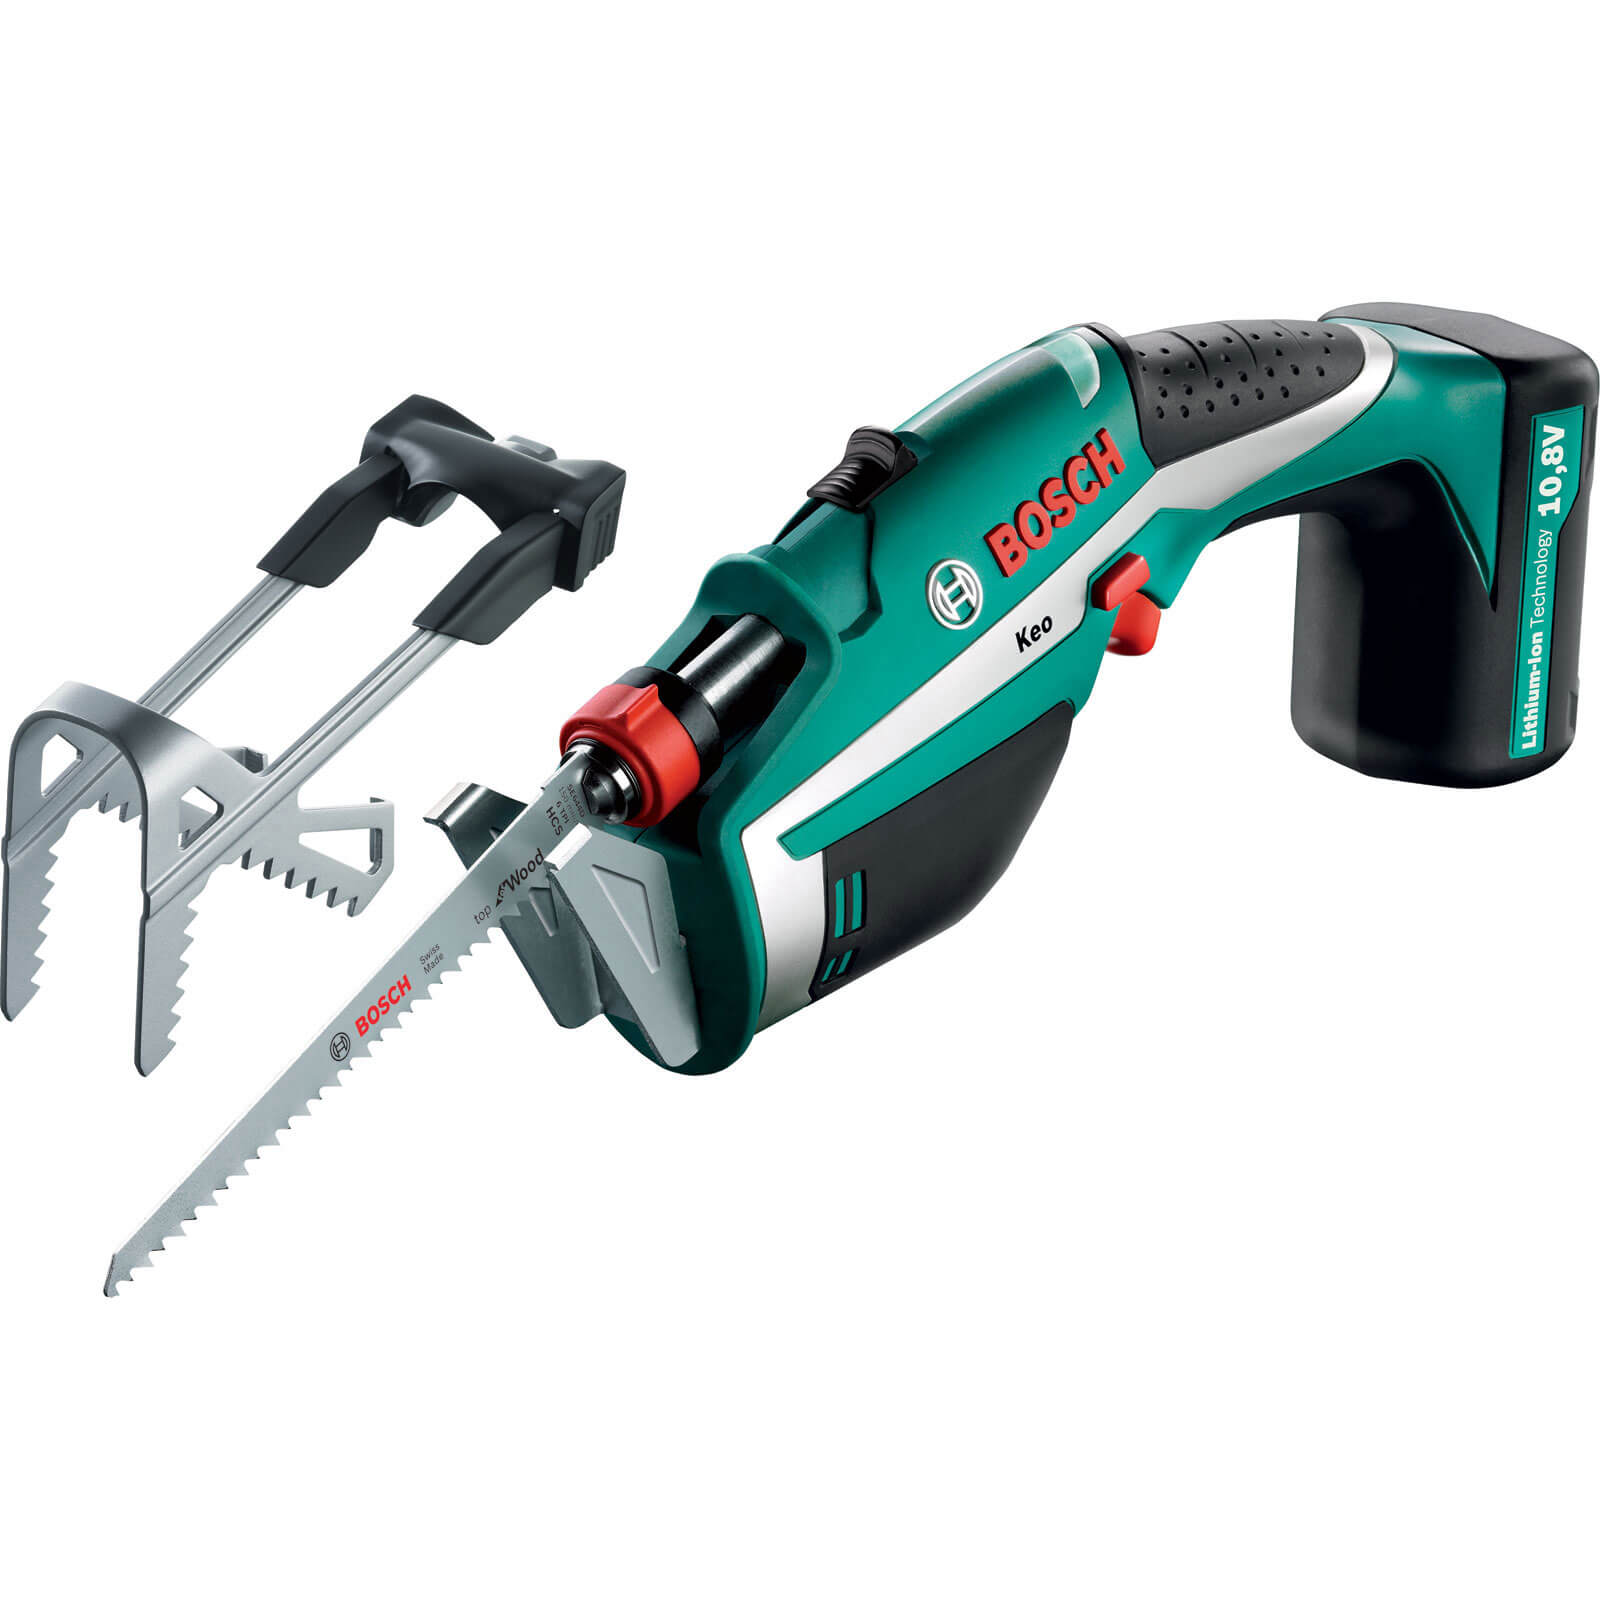 Bosch KEO 10.8v Cordless Reciprocating Pruning Saw 1 x 1.3ah Integrated Li-ion Charger